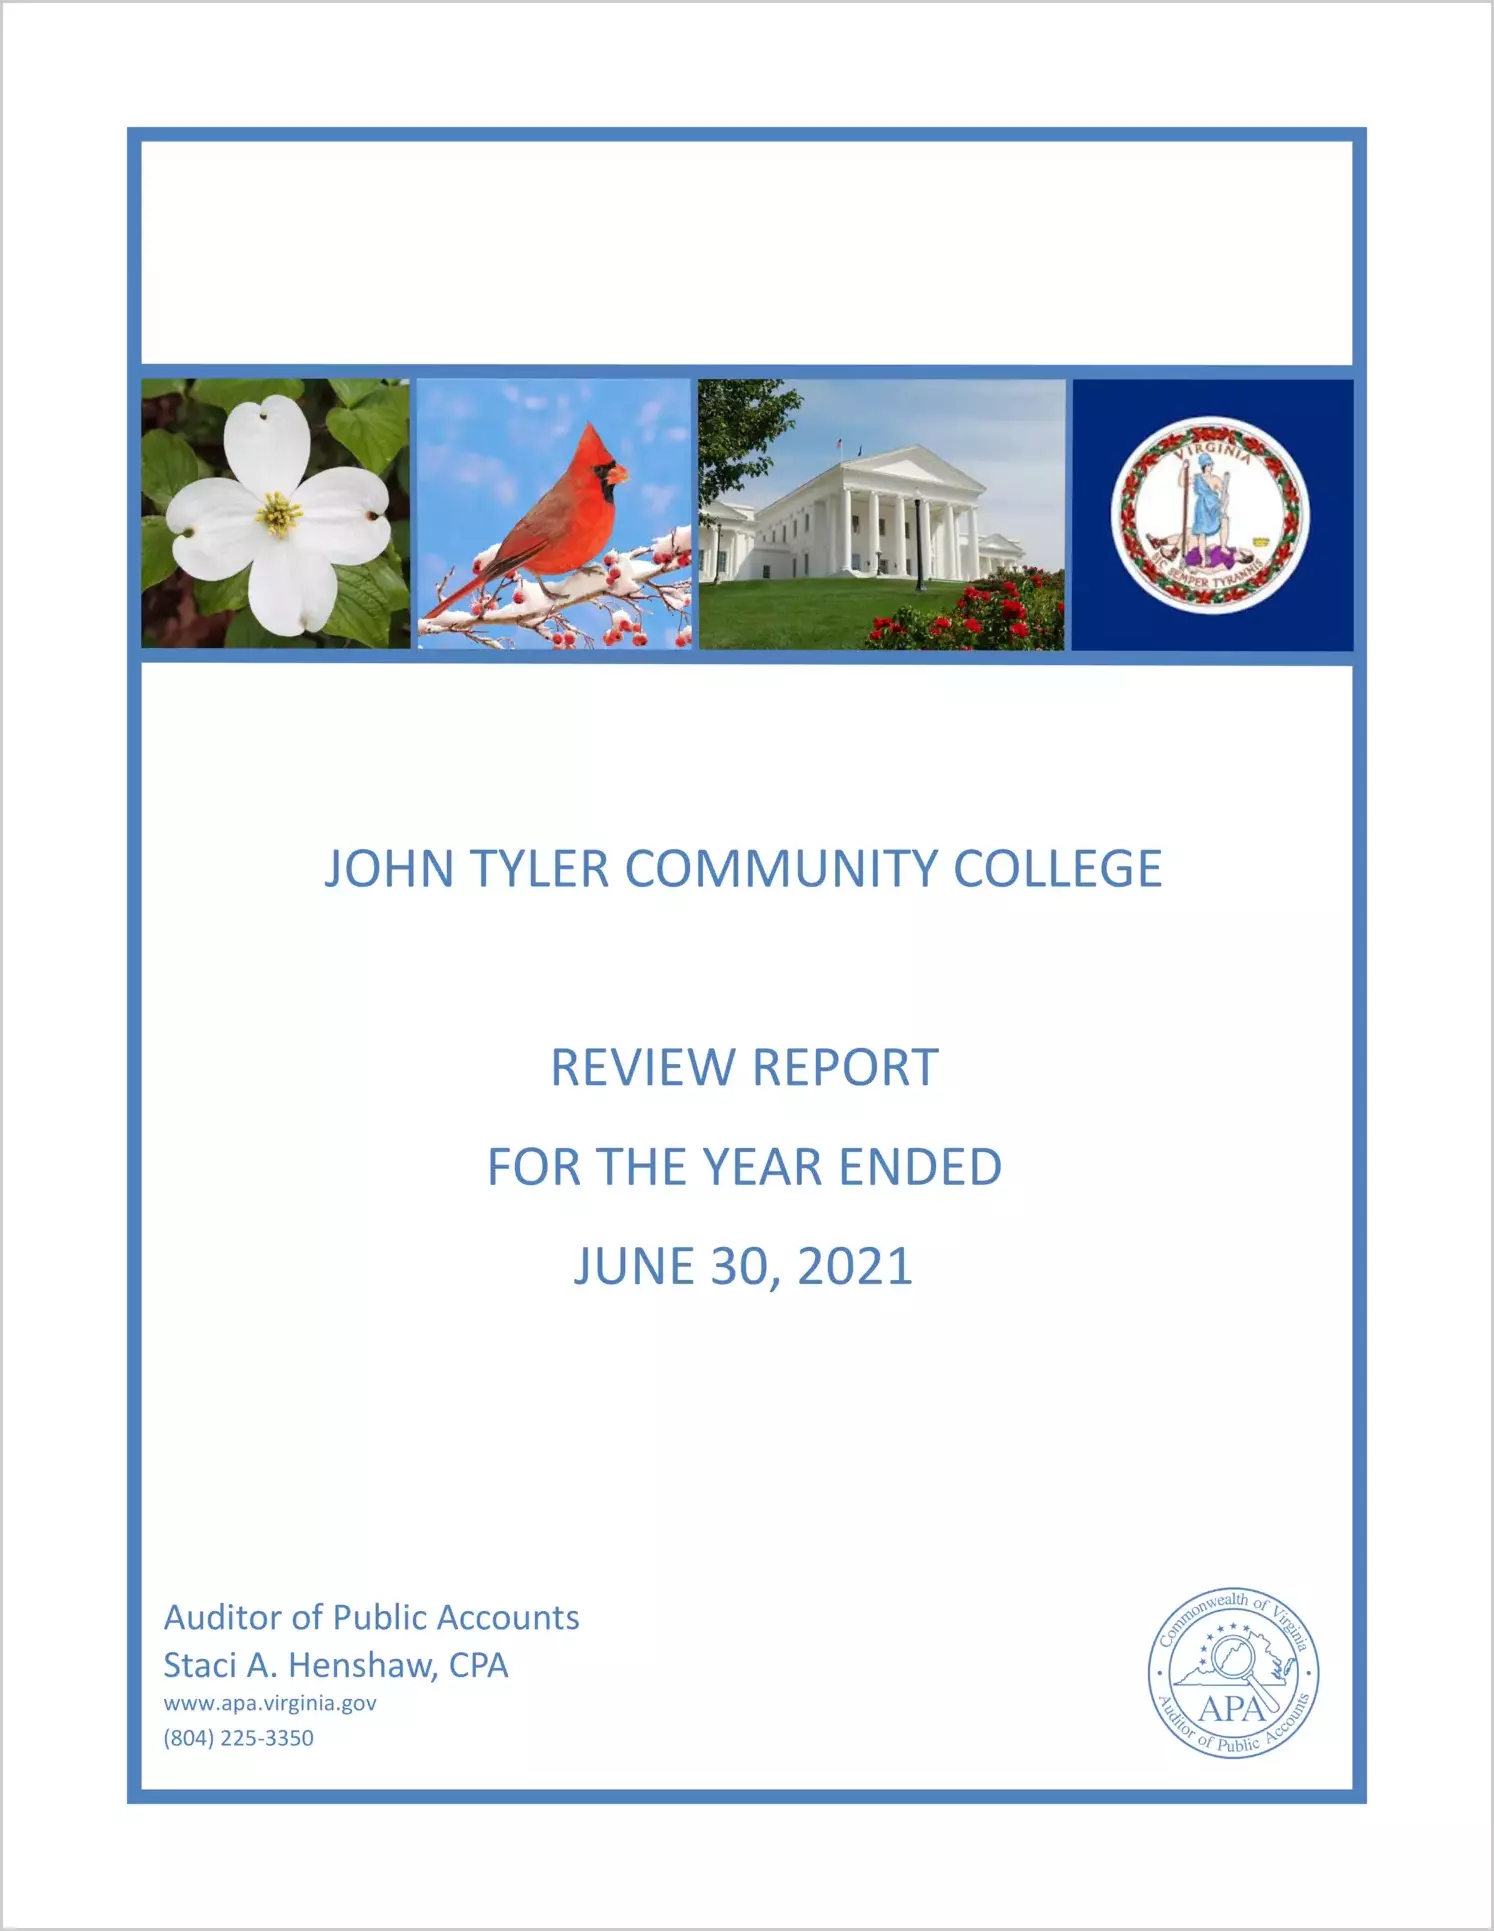 John Tyler Community College Review Report for the year ended June 30, 2021